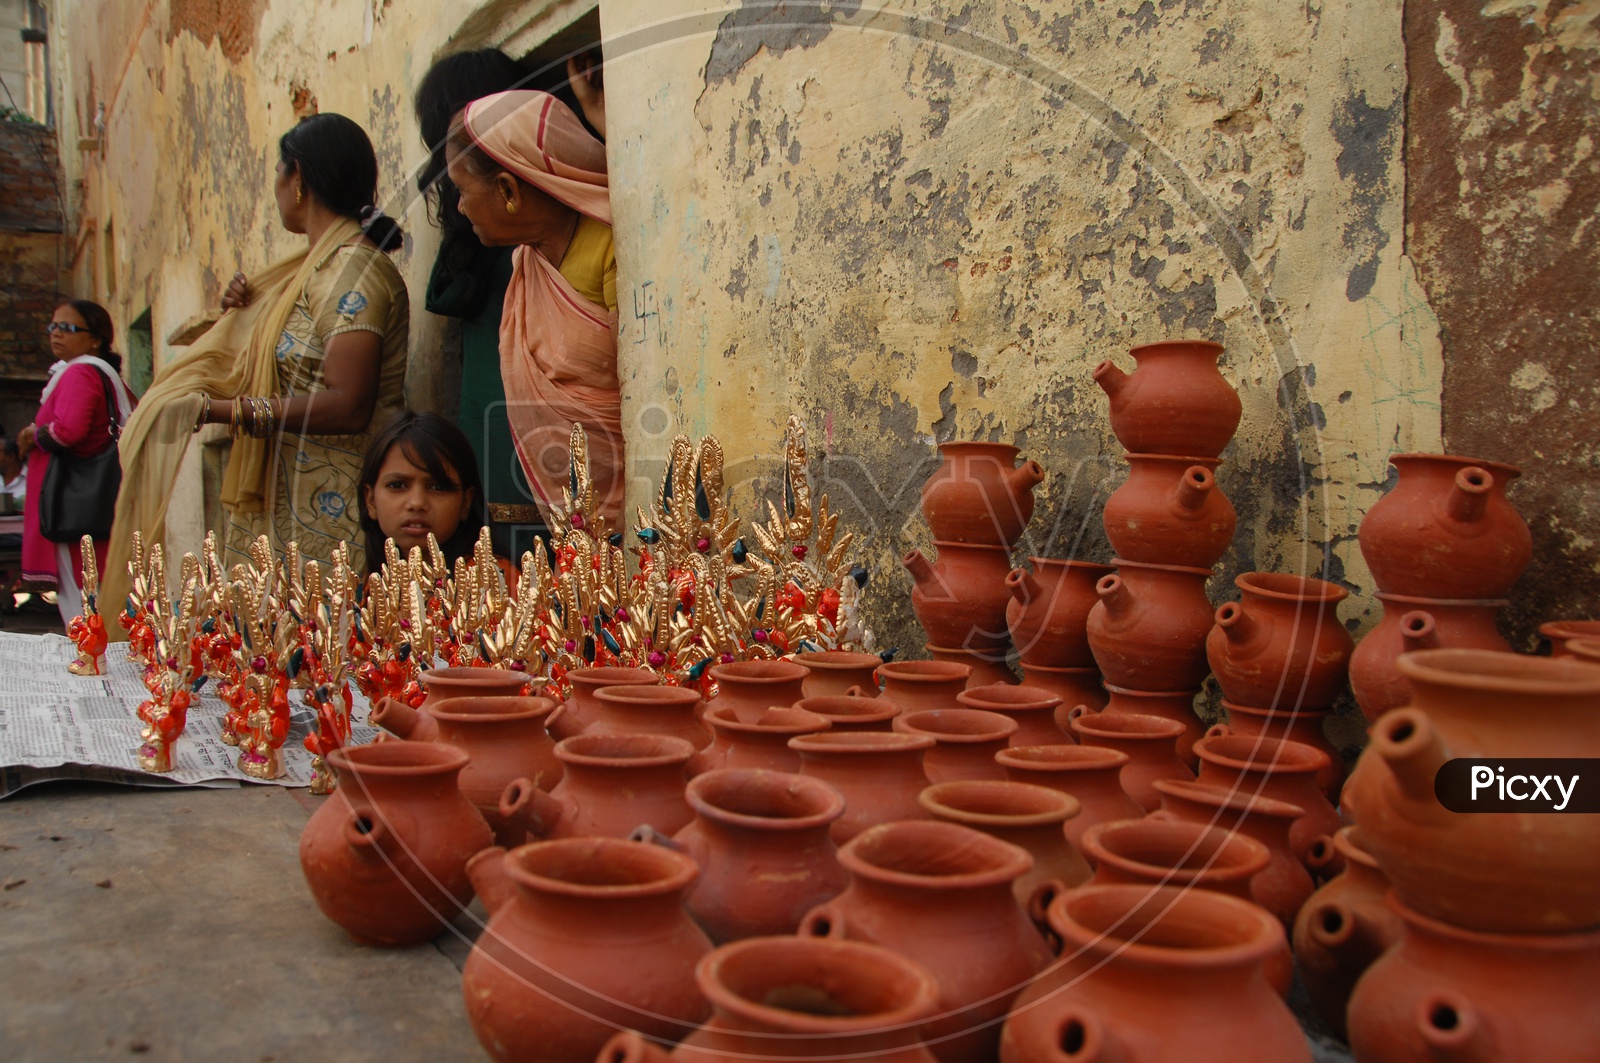 Photograph of a old women with pots in the foreground / People Faces